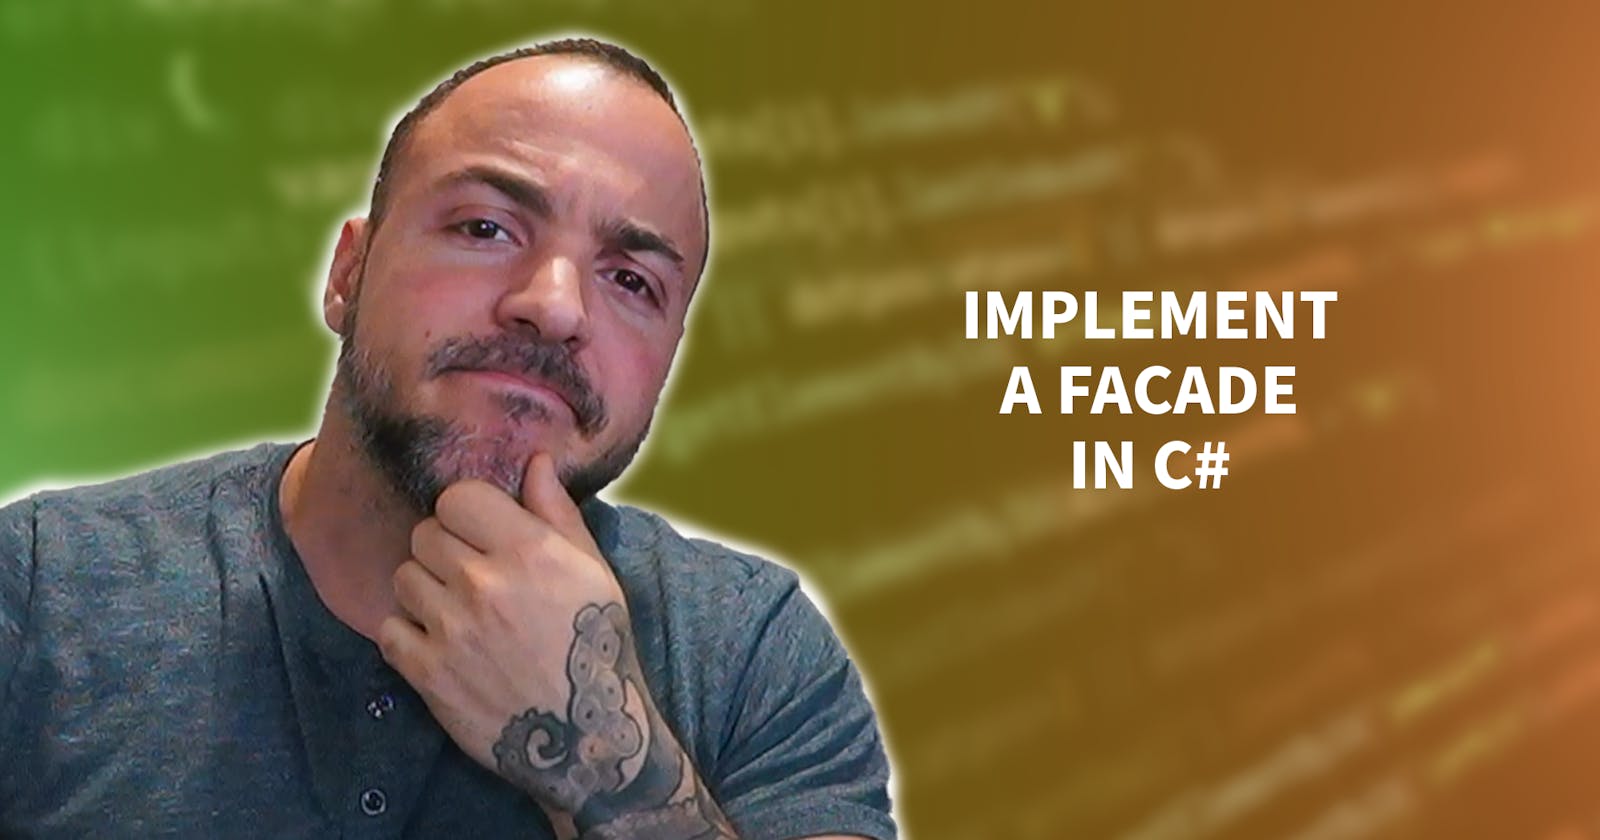 How To Implement The Facade Pattern In C# For Simplified Code And Increased Efficiency